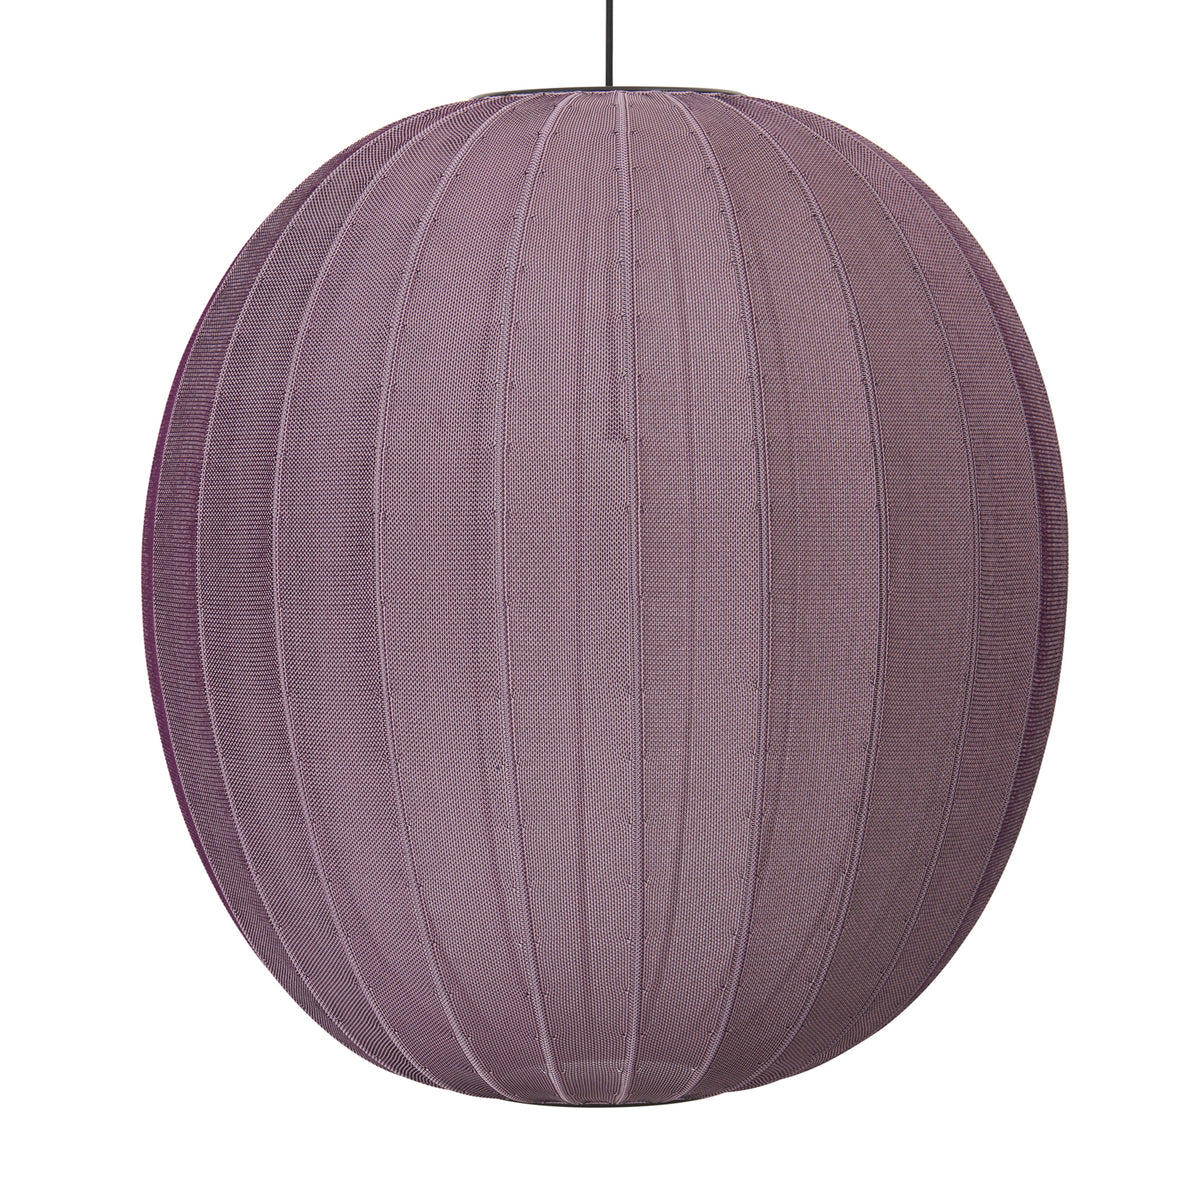 Made by Hand, Knit-Wit Pendant Lamp 75, Sandstone, Pendant,